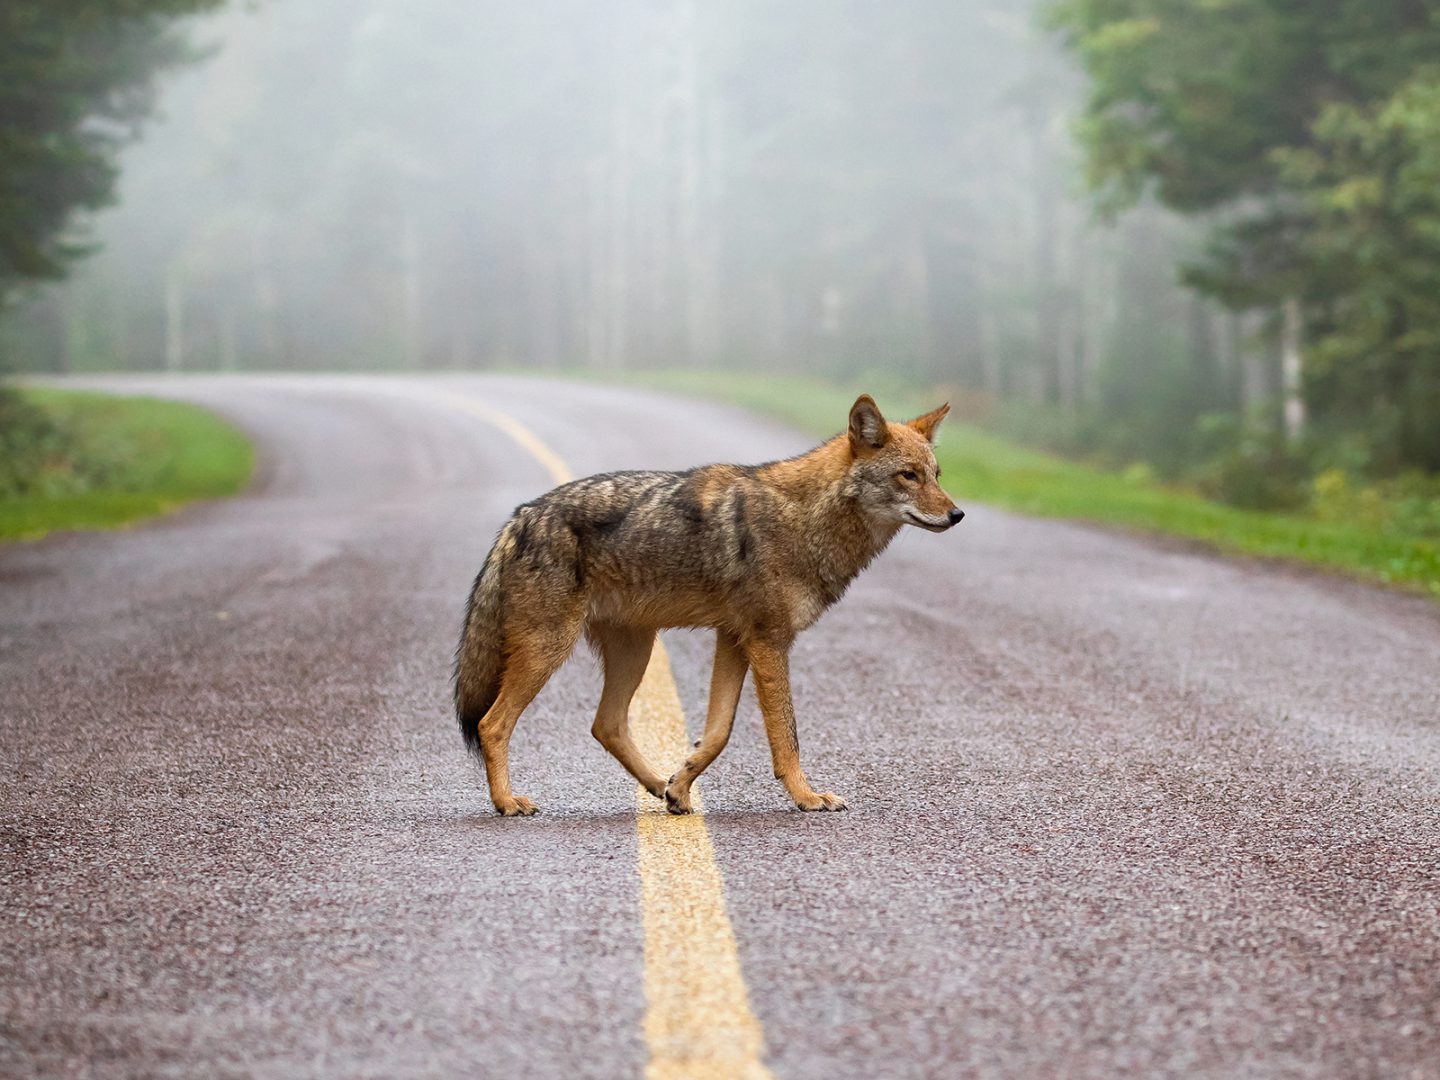 The grand prize winner of the 2018 Wildlife Photography of the Year competition, an eastern coyote crossing a road, by Brittany Crossman